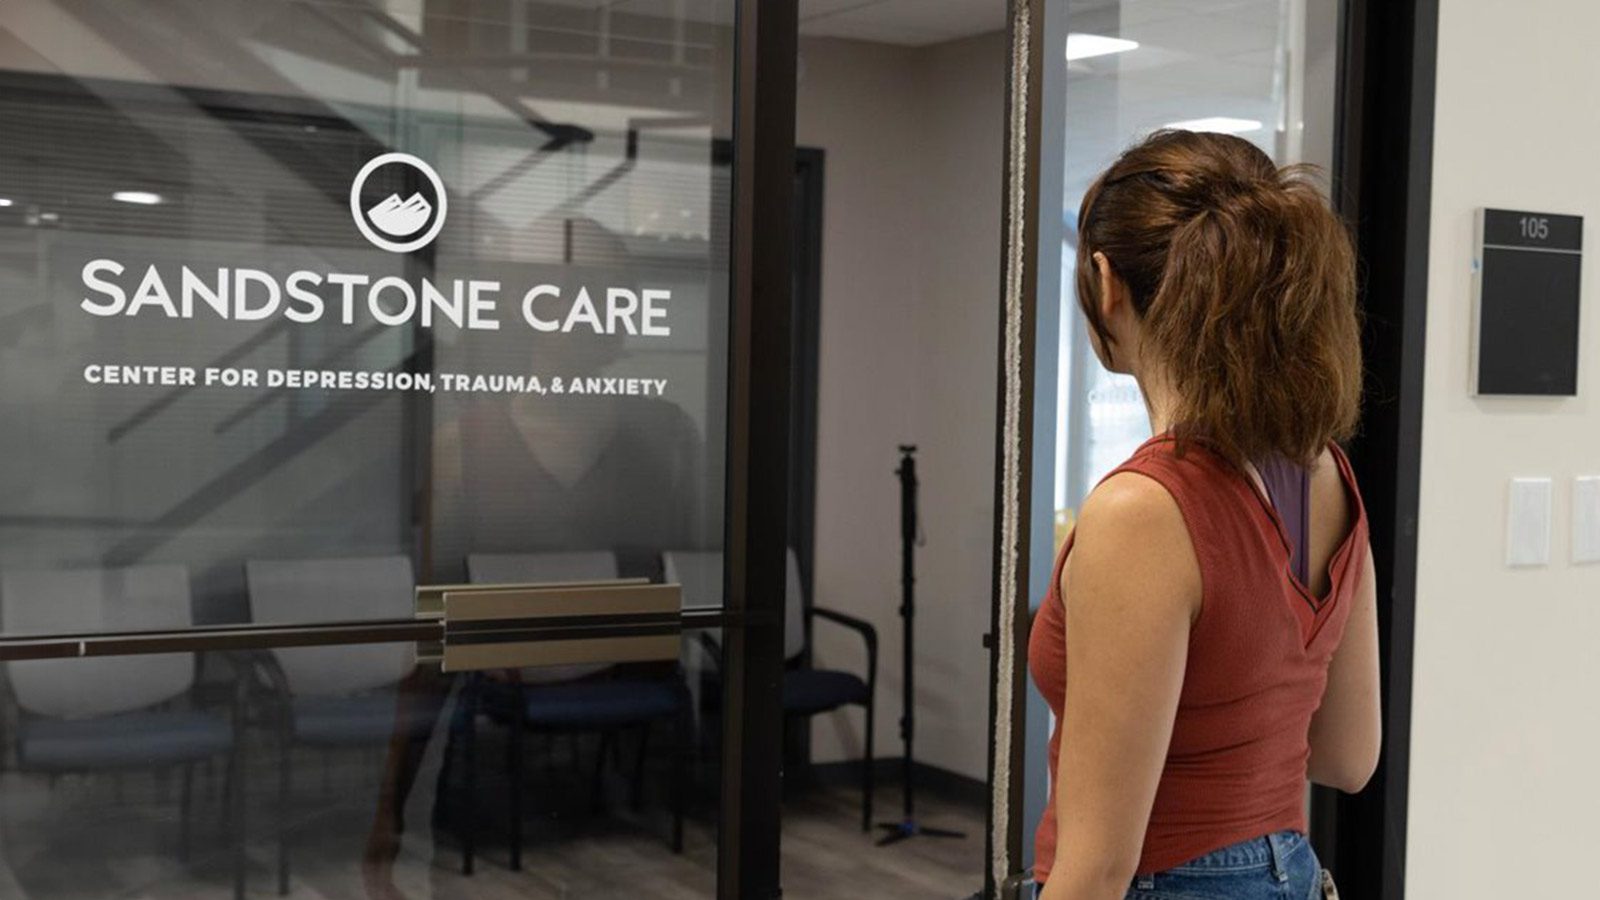 A woman walking into an office with a sign that reads "Sandstone Care, Center for Depression, Trauma, & Anxiety".